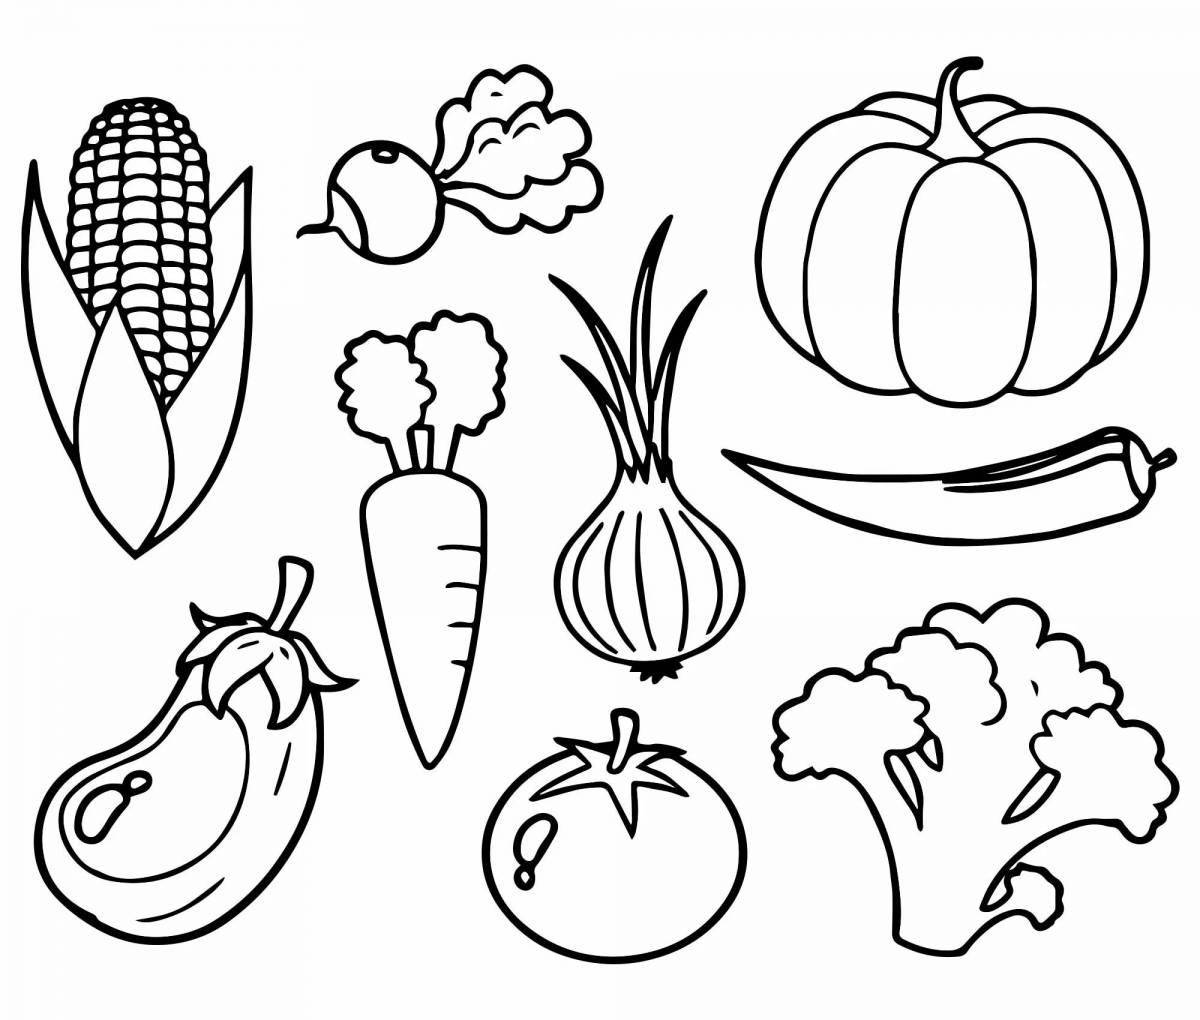 Adorable fruit coloring book for 6-7 year olds